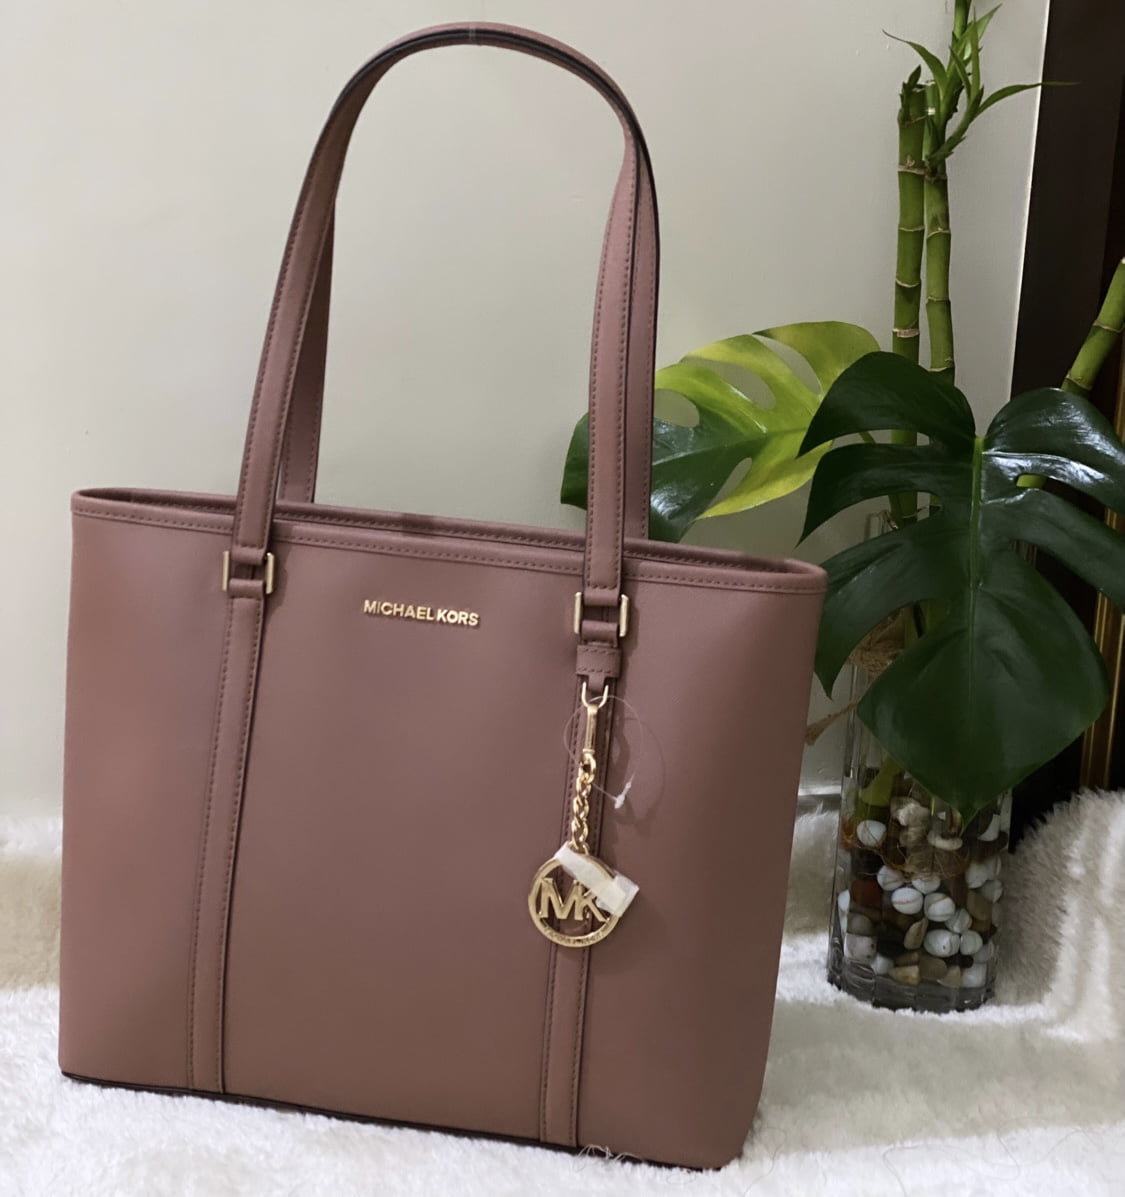 Michael Kors Sady Tote Bag Dusty Rose – THE OUTLET